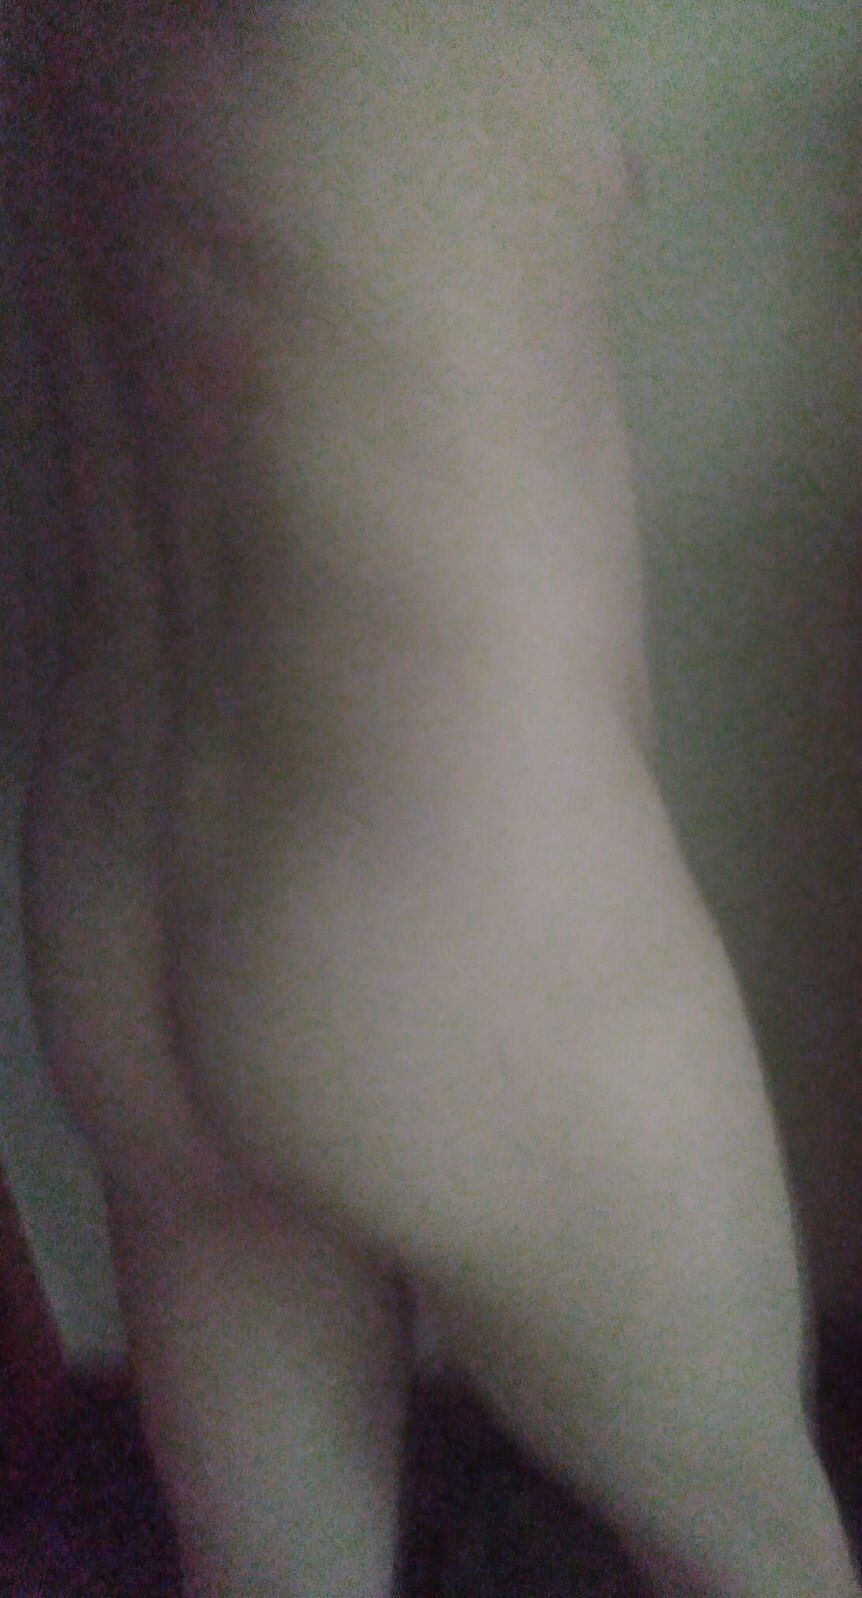 my pale white ass #2